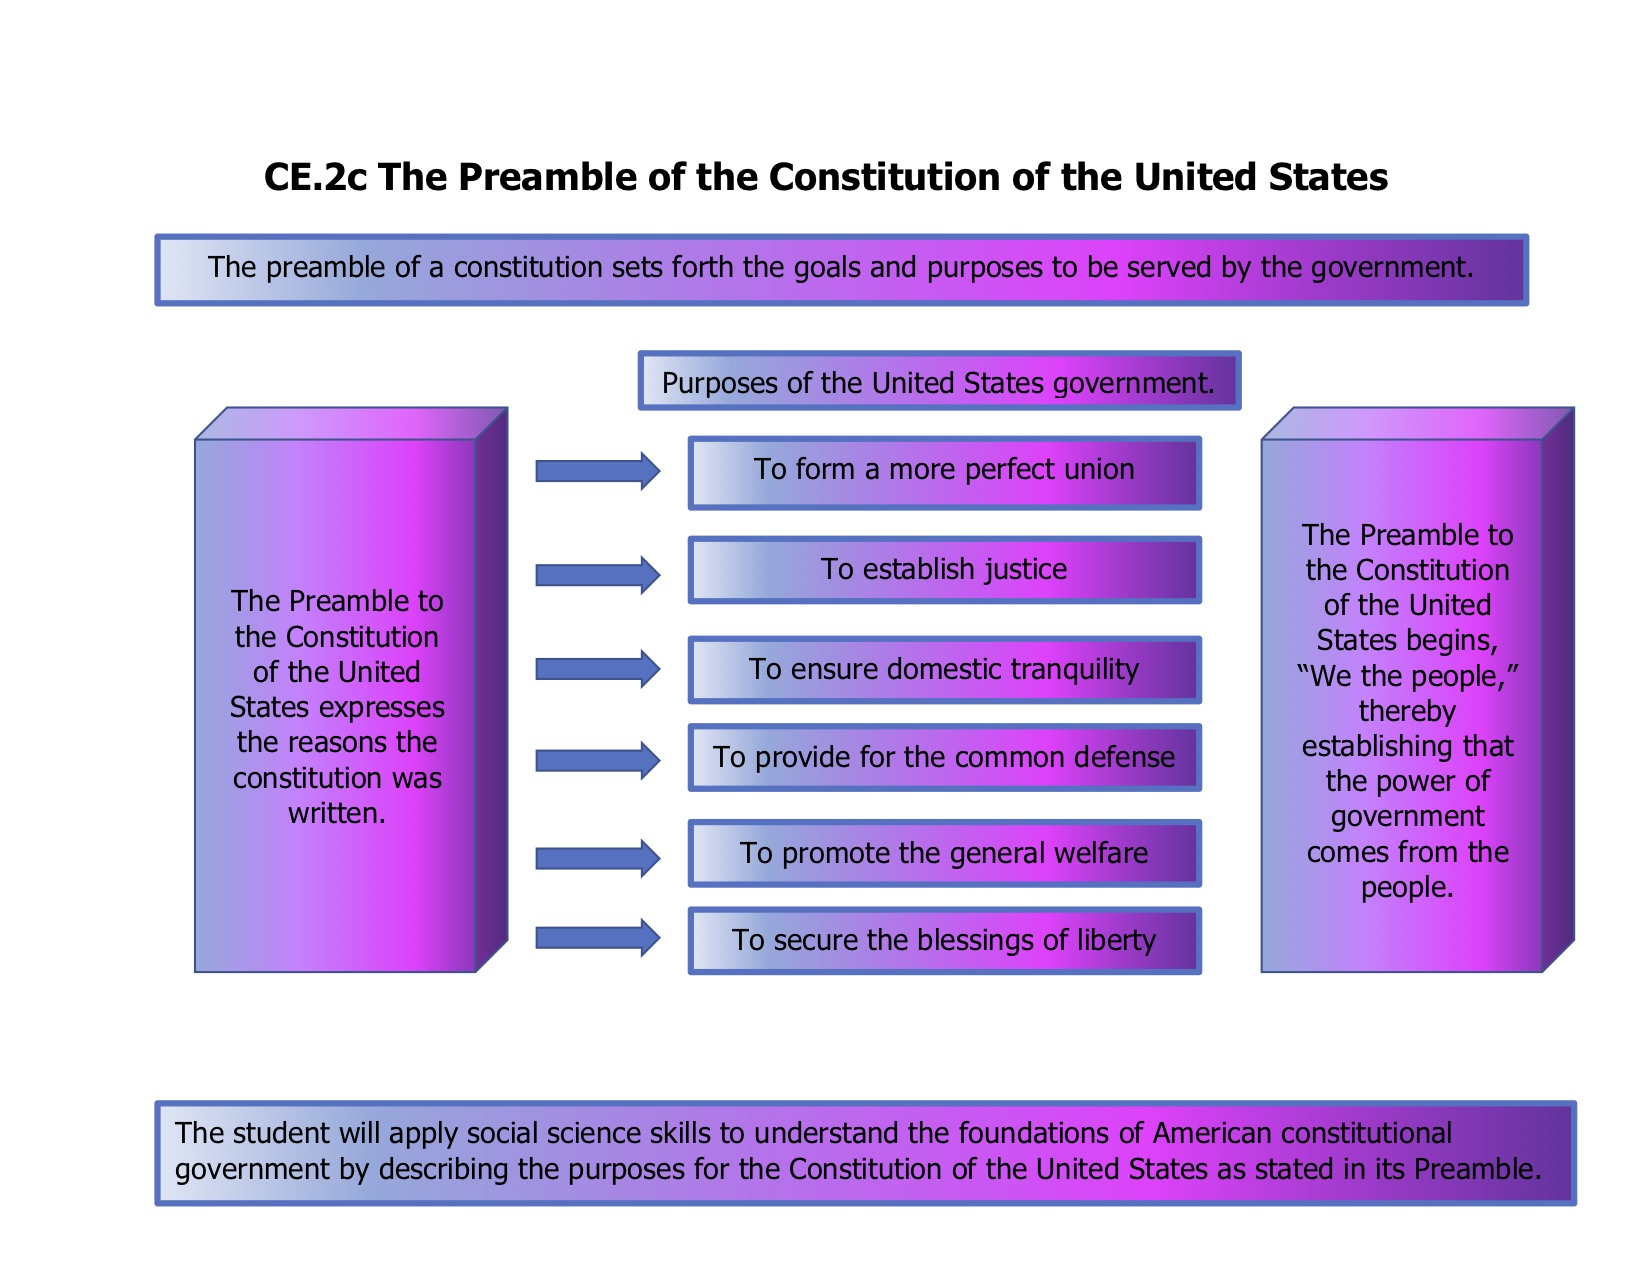 This graphic organizer shows the reasons why the Constitution was written as stated in the Preamble of the Constitution.